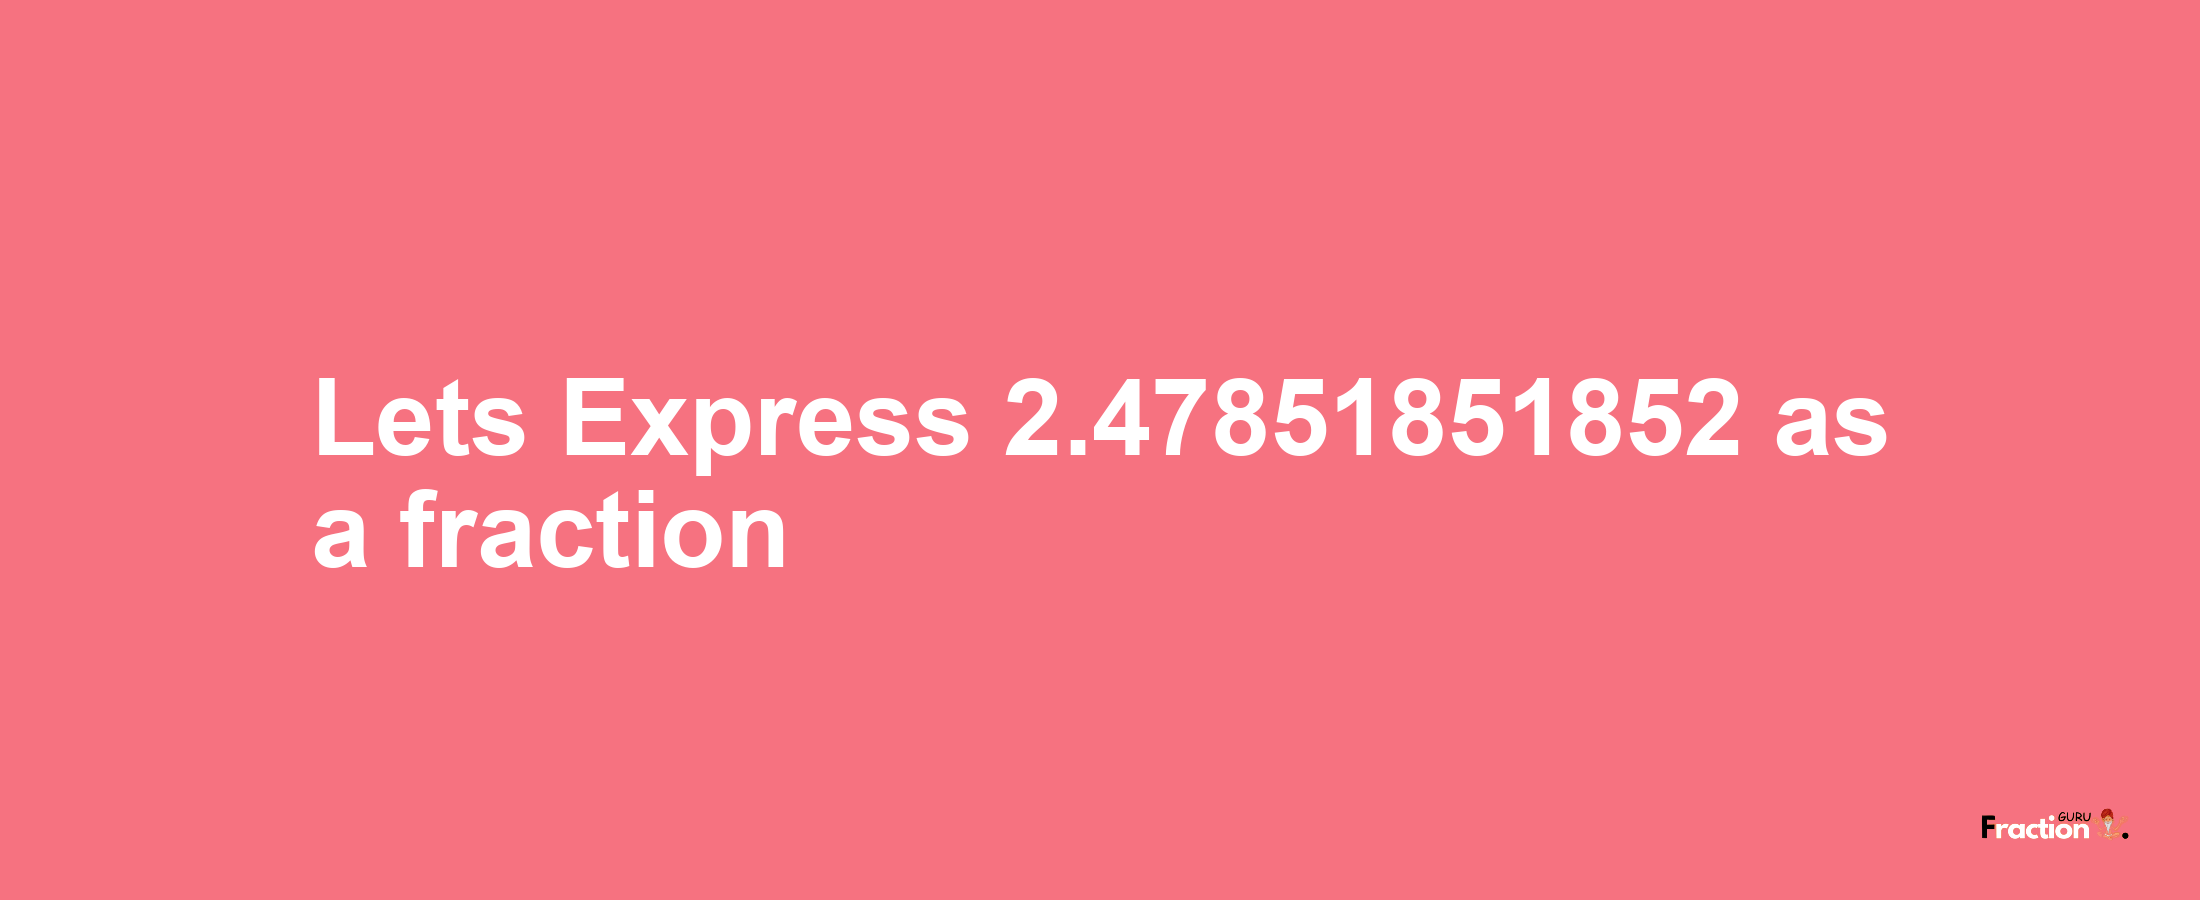 Lets Express 2.47851851852 as afraction